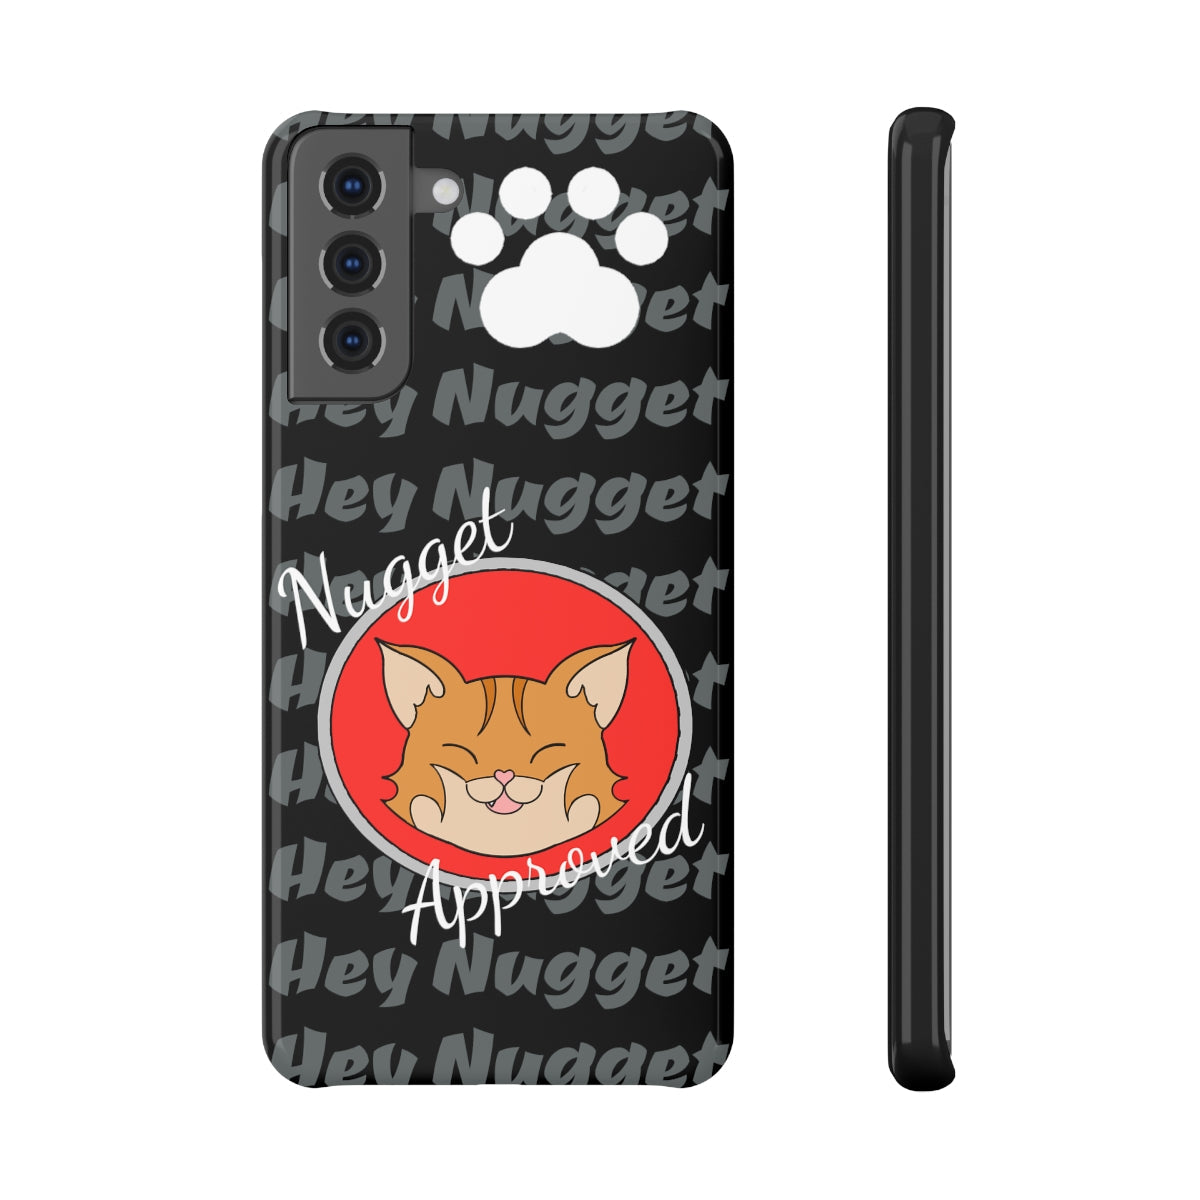 Stand out  with the  Galaxy S21 Slim Snap Case  available at Hey Nugget. Grab yours today!